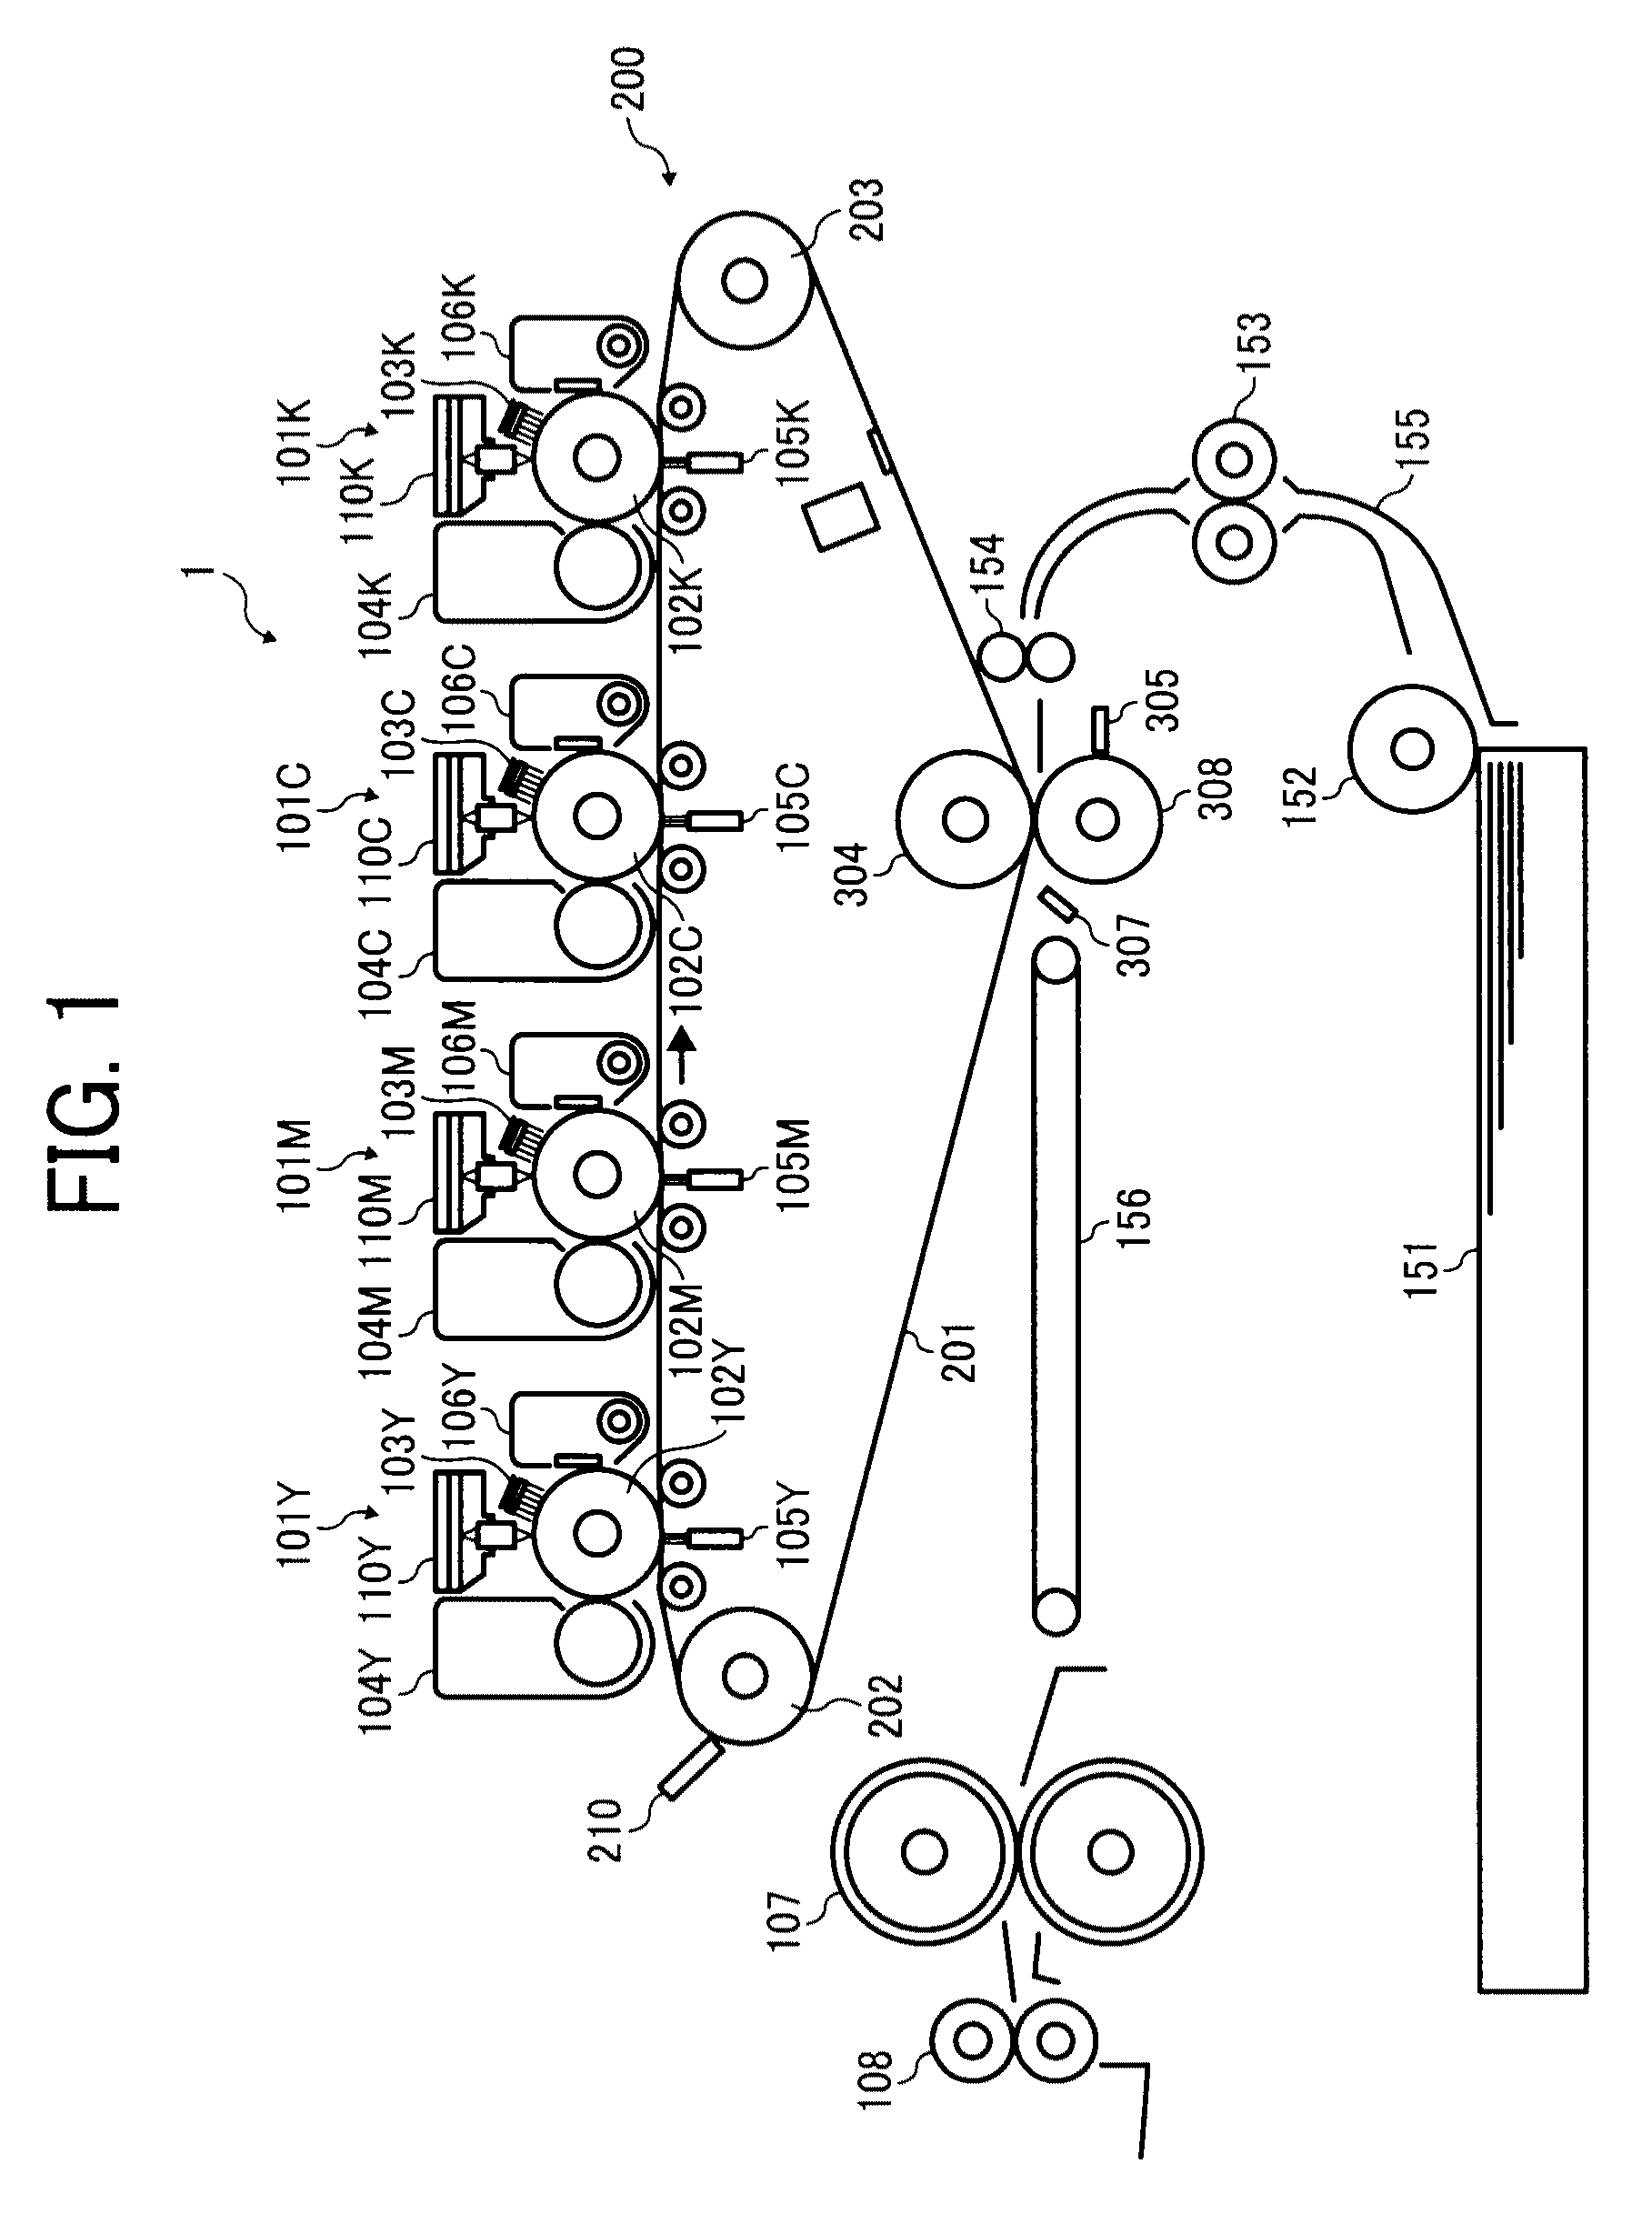 Endless belt member, transfer unit incorporating same, and image forming apparatus incorporating same